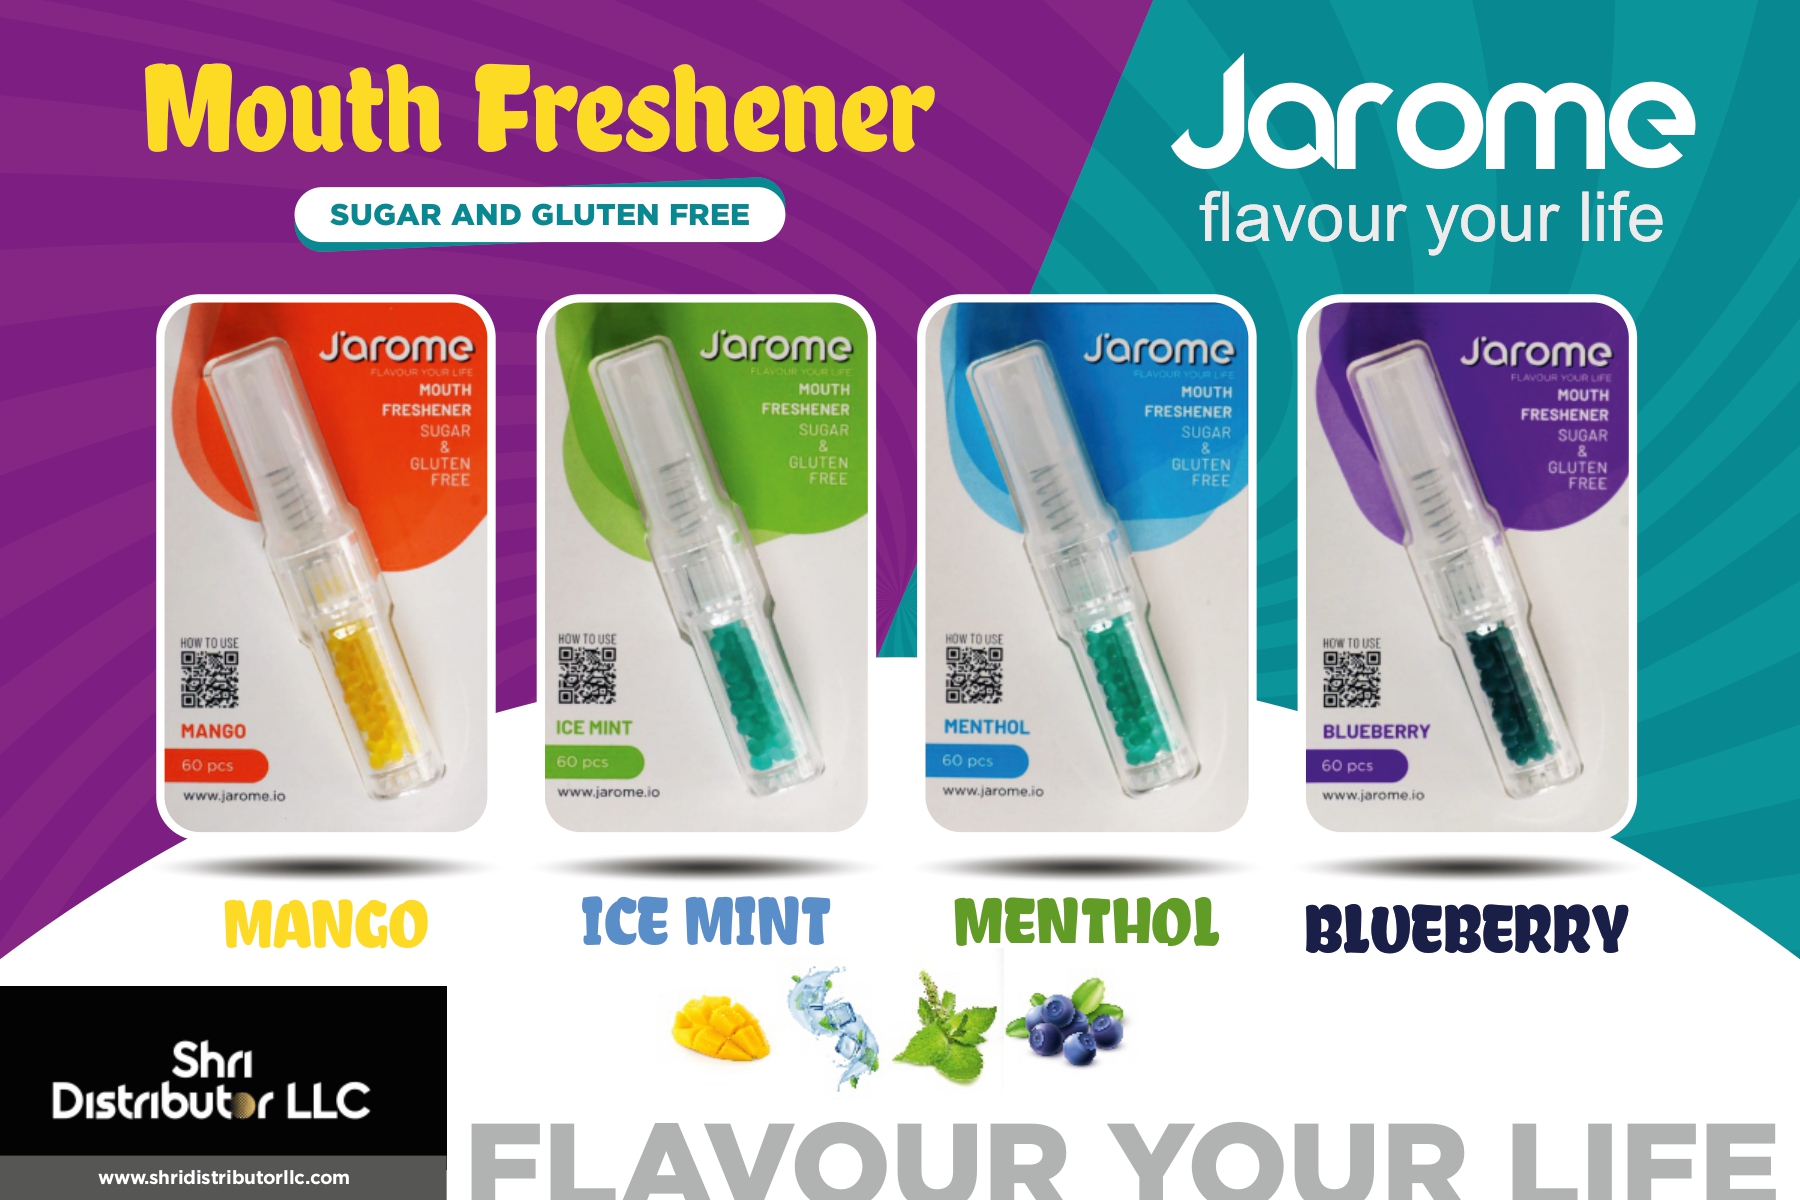 Jarome Mouth Freshener - Blueberry - 60 Pieces Gluten Free, Plant-Based, Sugar-Free, Made in France